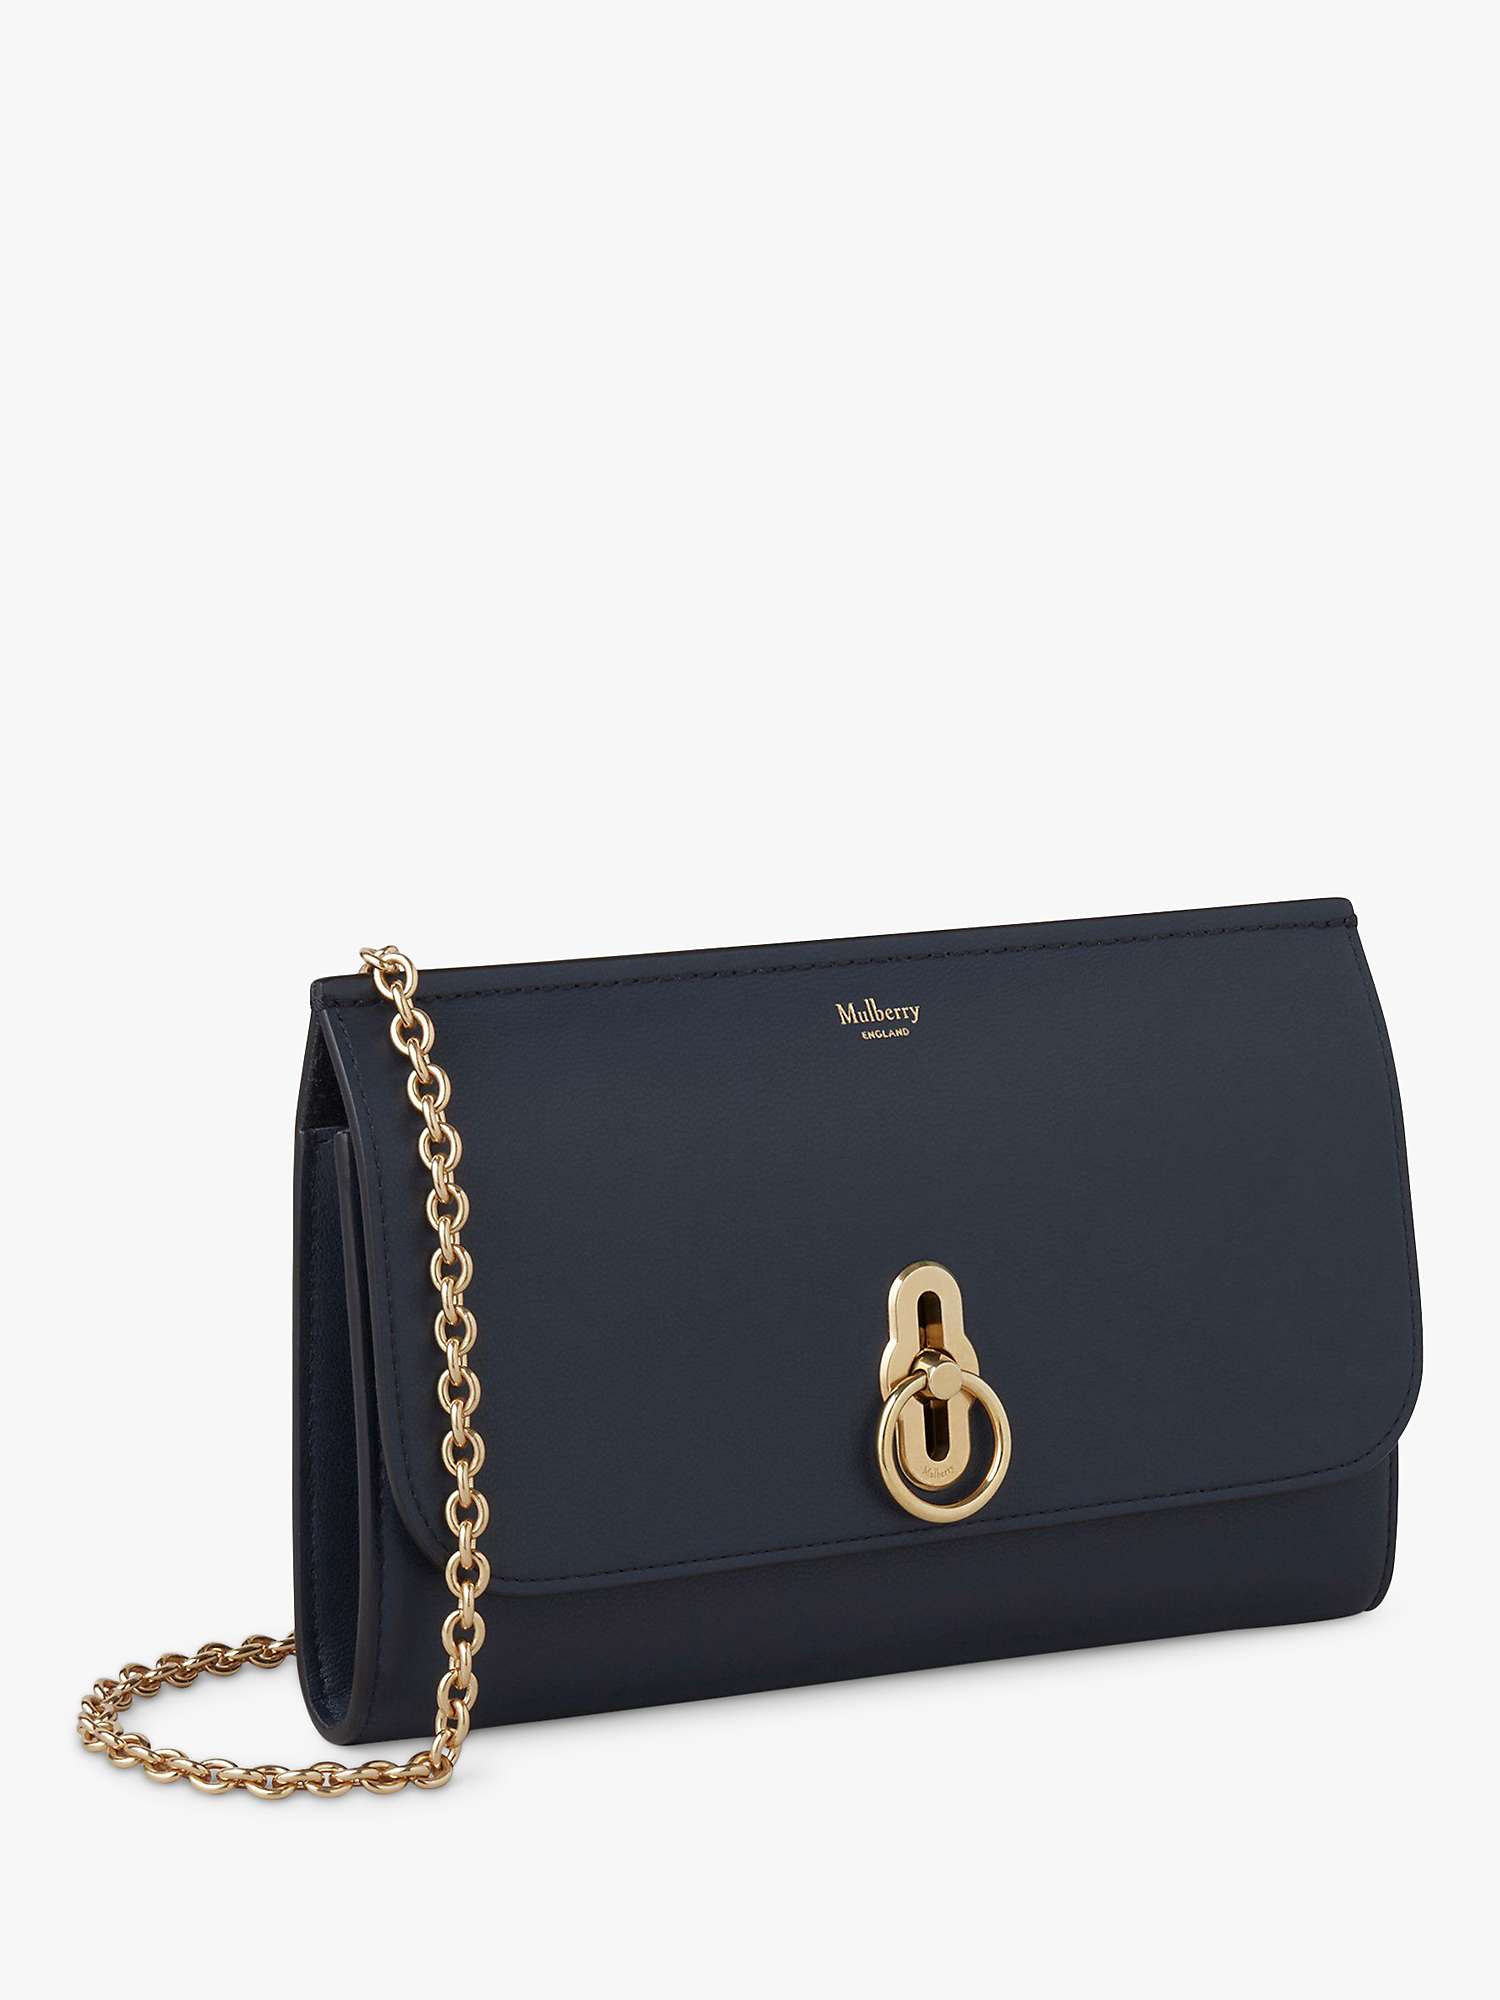 Buy Mulberry Amberley Micro Classic Grain Leather Clutch Bag Online at johnlewis.com